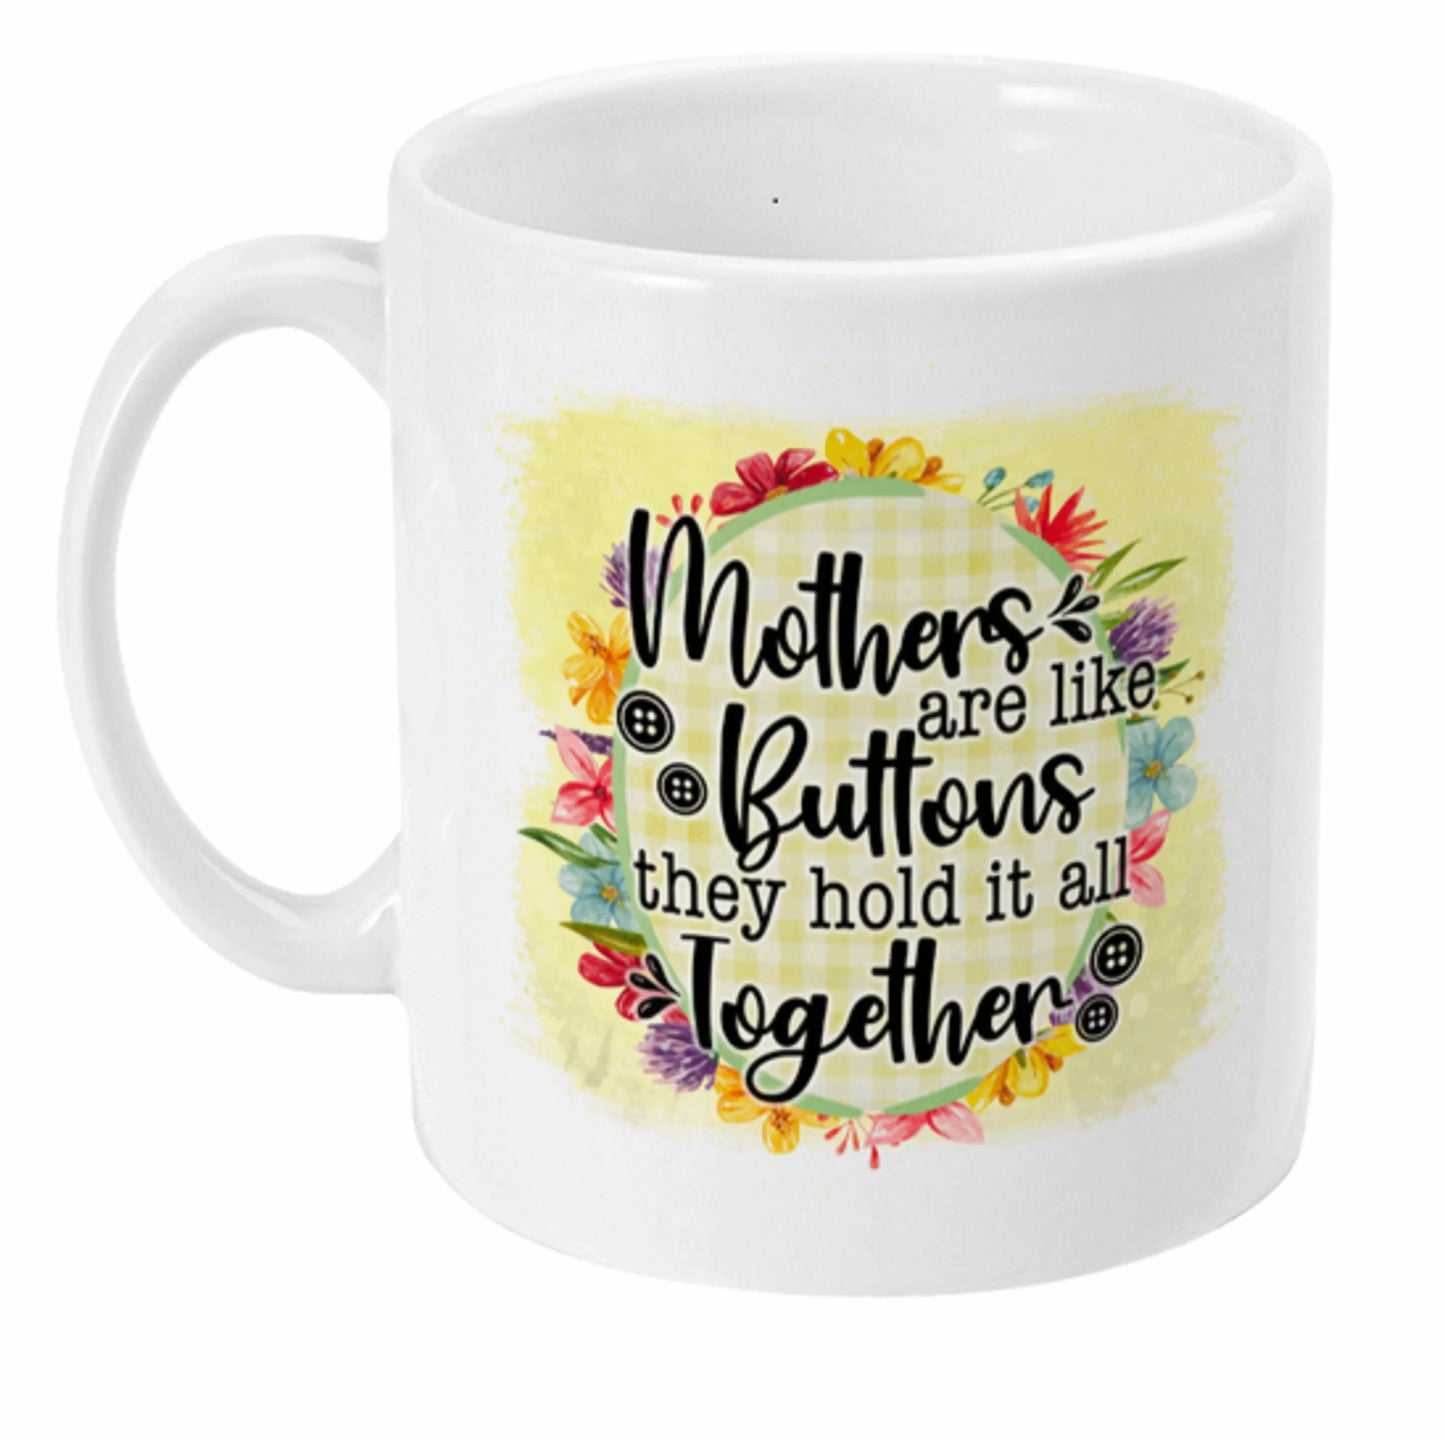  A Mother Is Like Buttons Coffee Mug by Free Spirit Accessories sold by Free Spirit Accessories